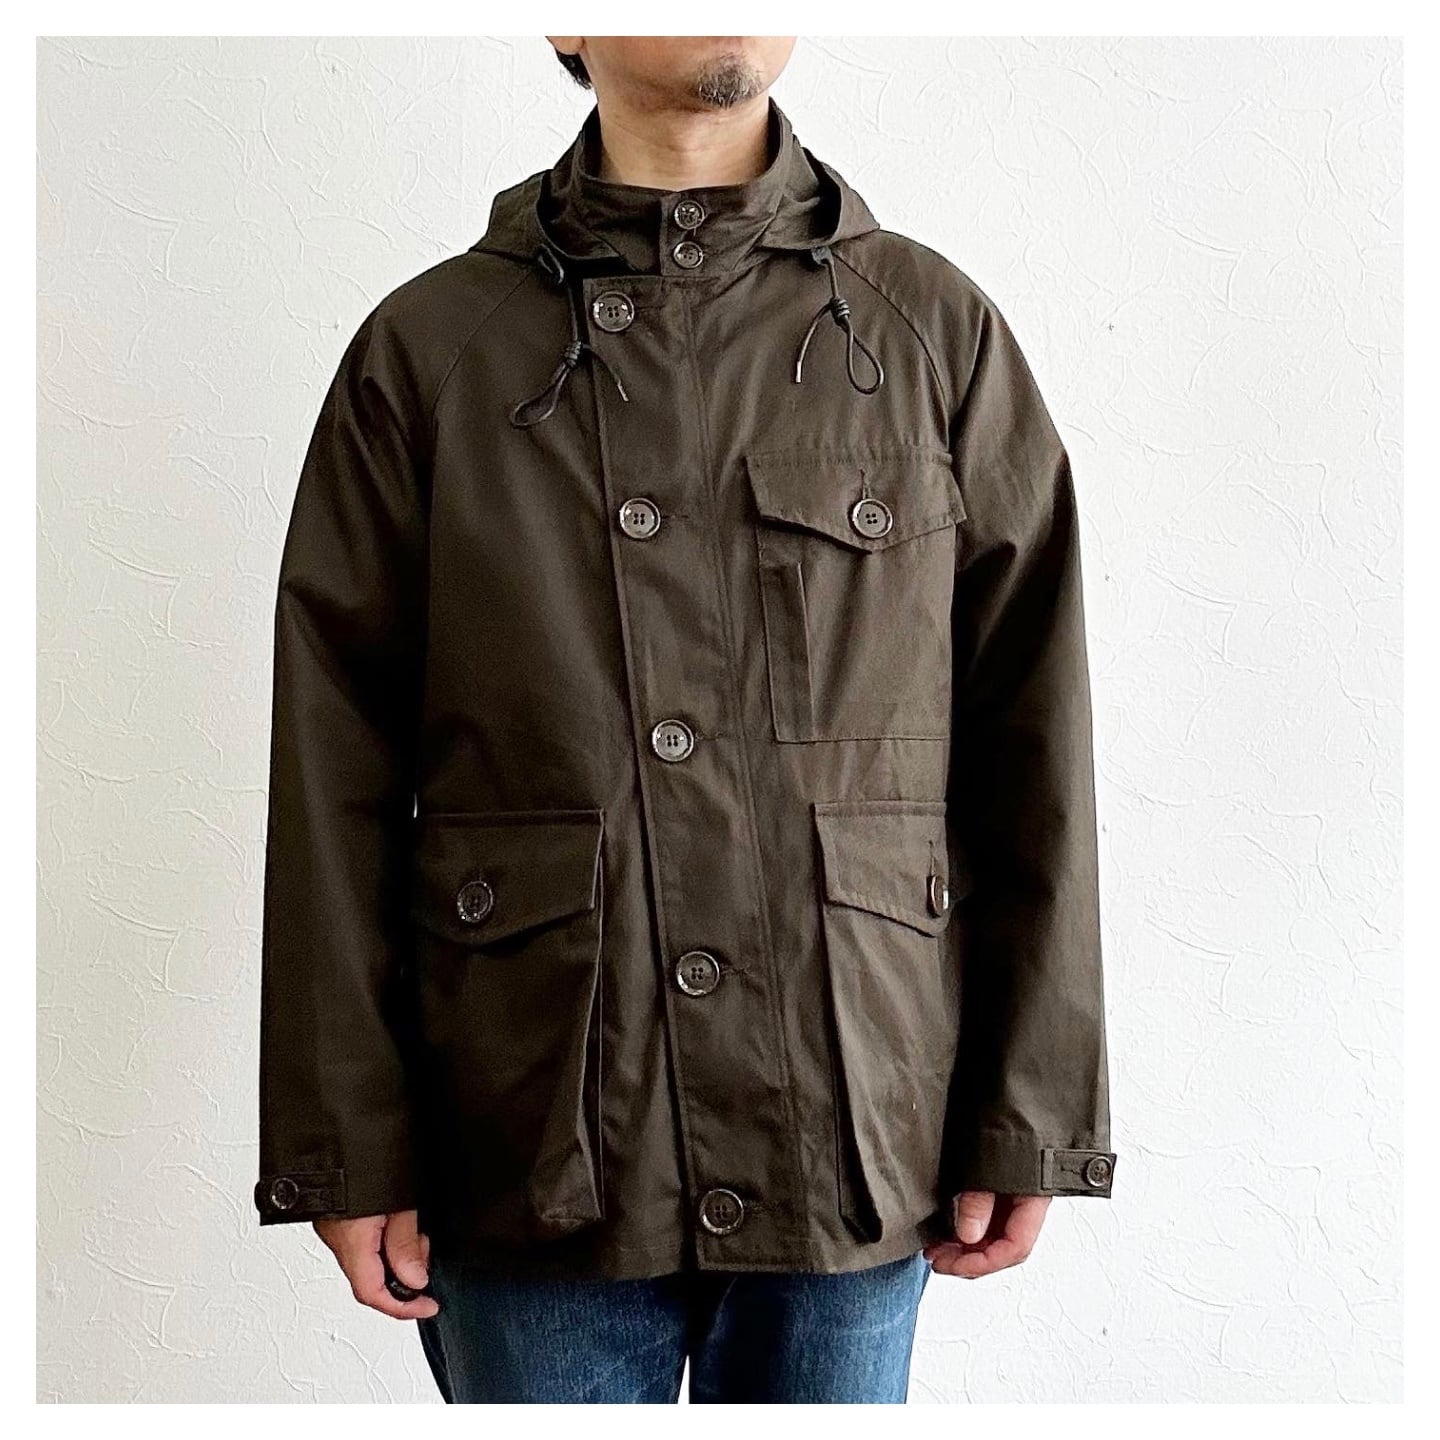 WORKERS | RAF Parka heavy ventile ワーカーズ | RAFパーカー ヘビー ...